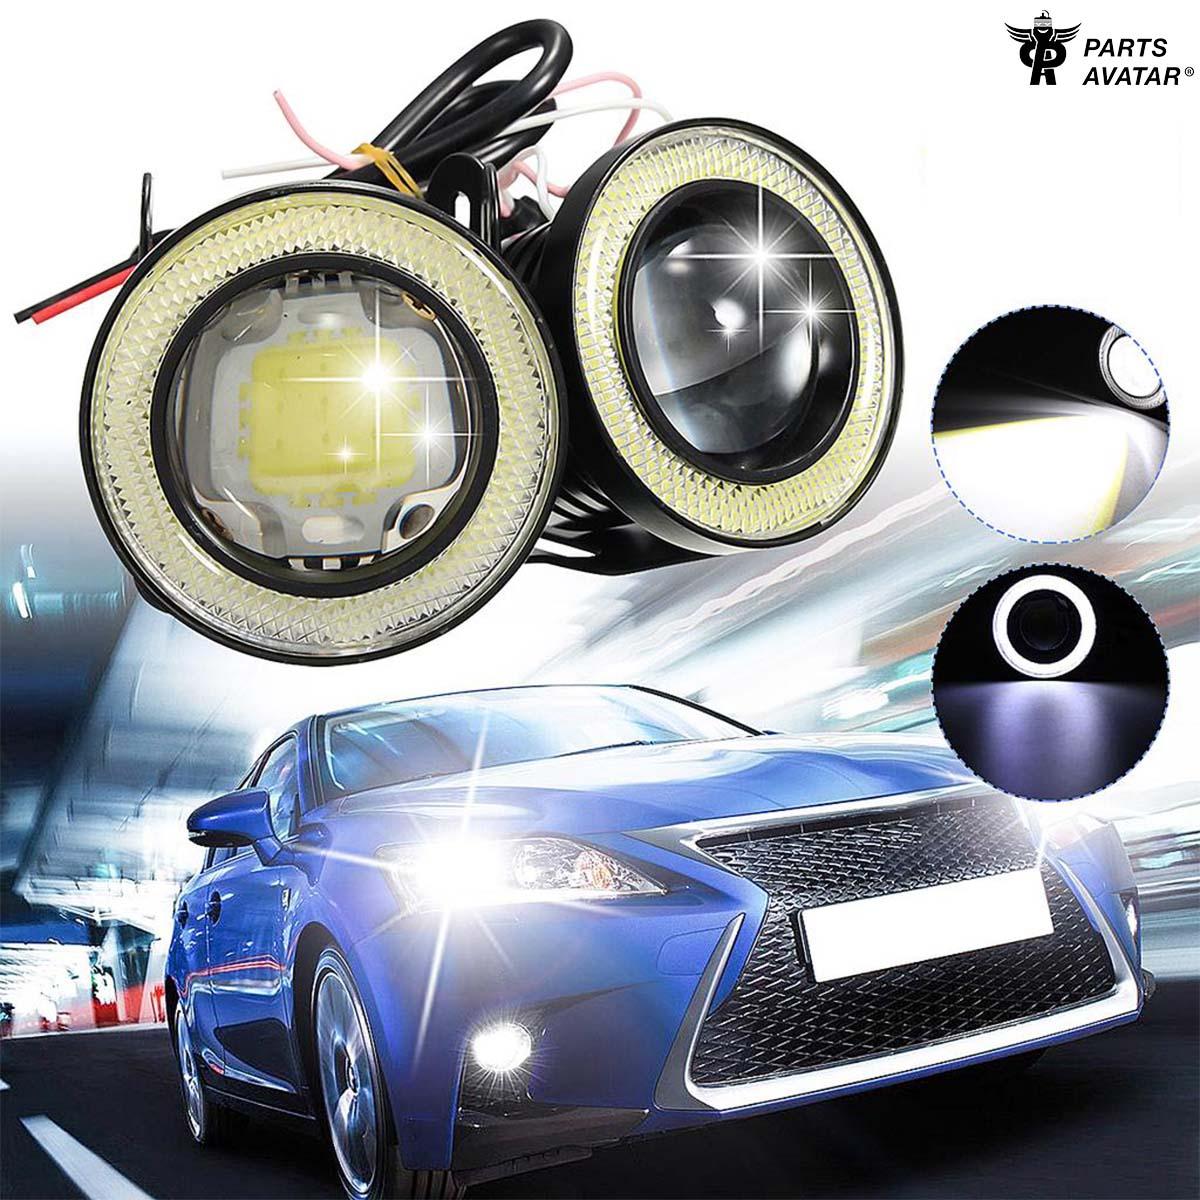 headlights-buying-guide/images/Halo%20Light%20-%20Headlights%20Buying%20Guide%20-%20PartsAvatar.jpeg